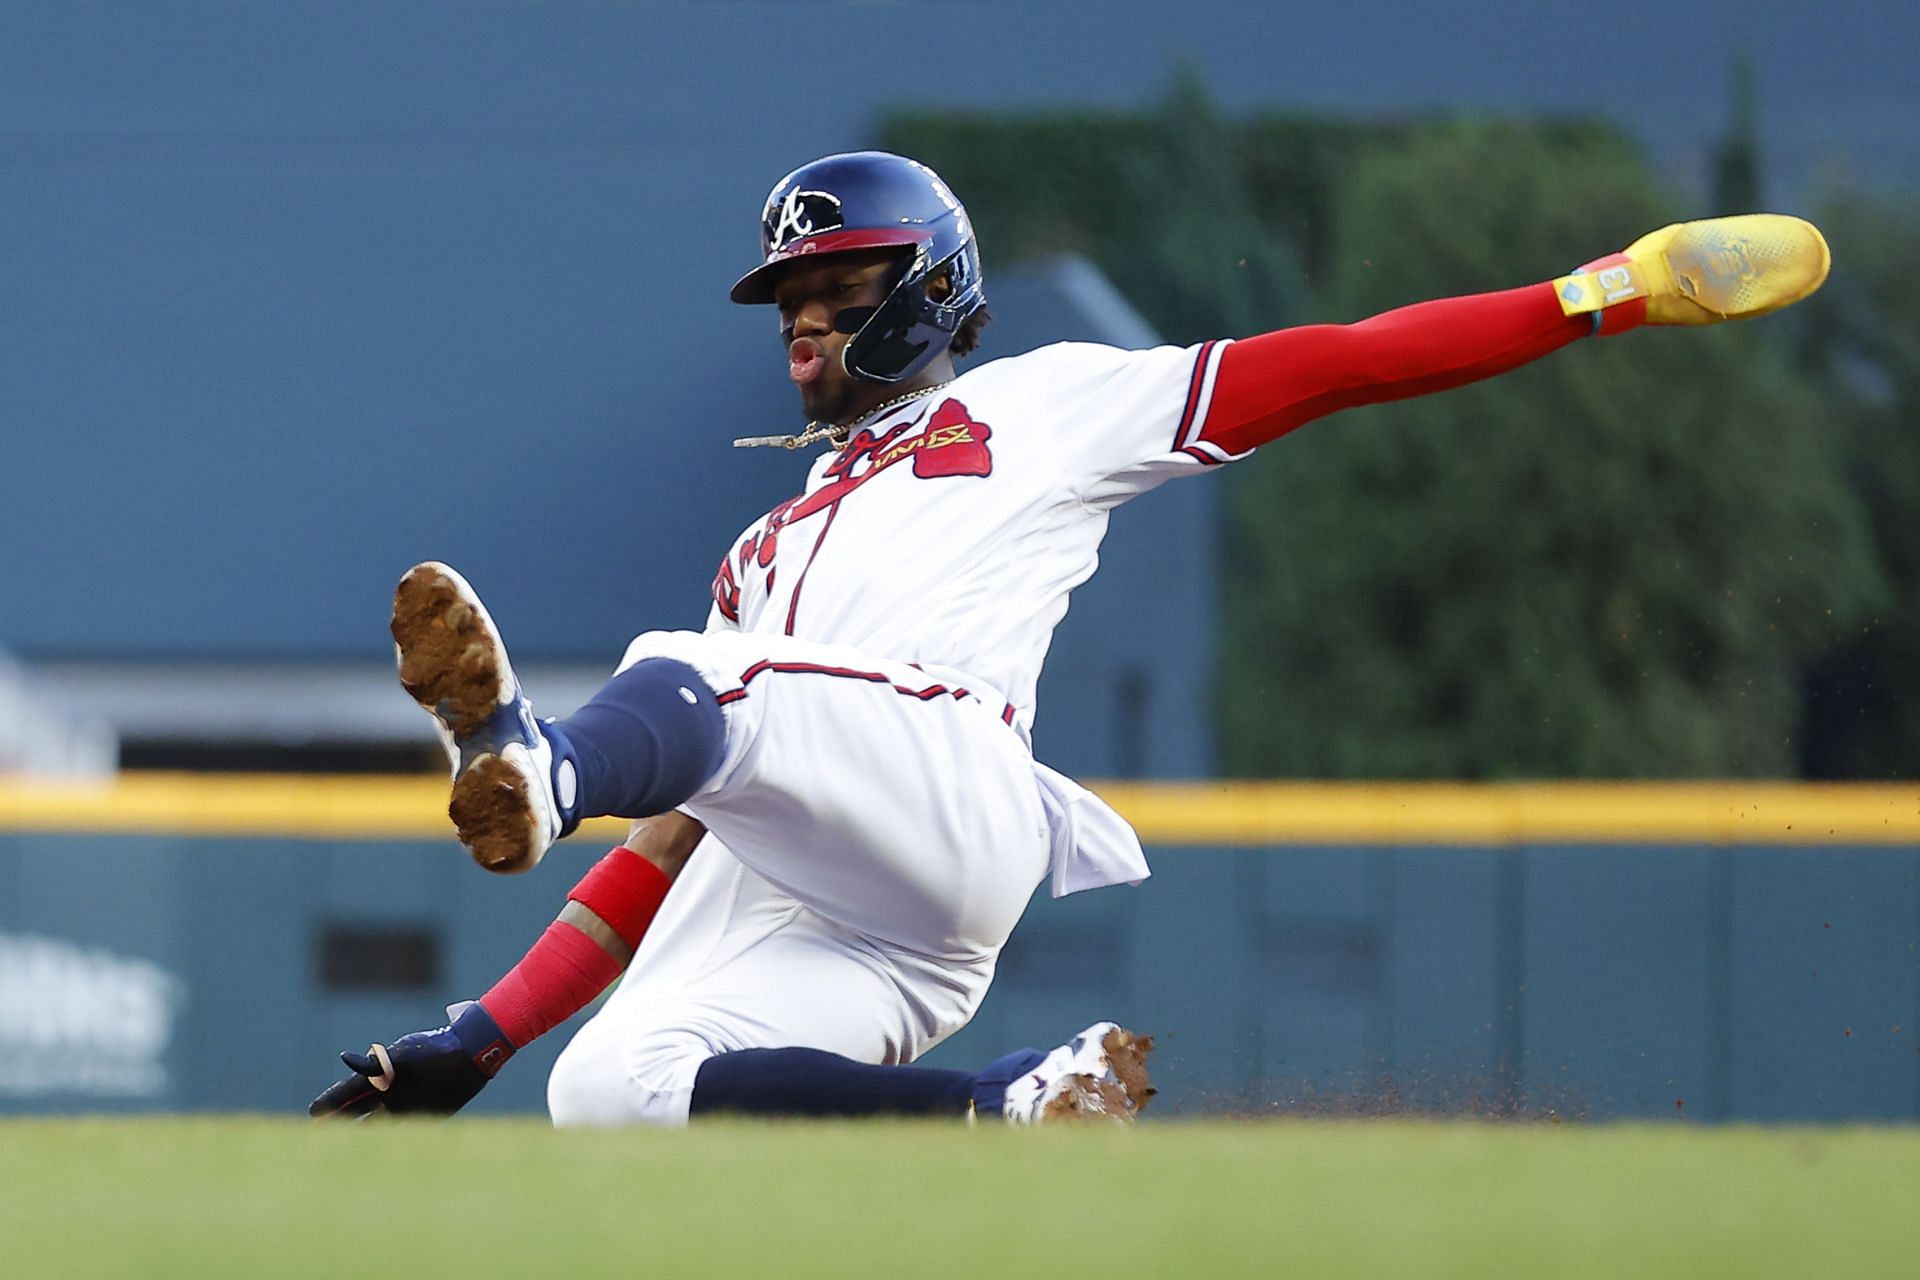 Ronald Acuña Jr. looks all the way back, which could make Braves